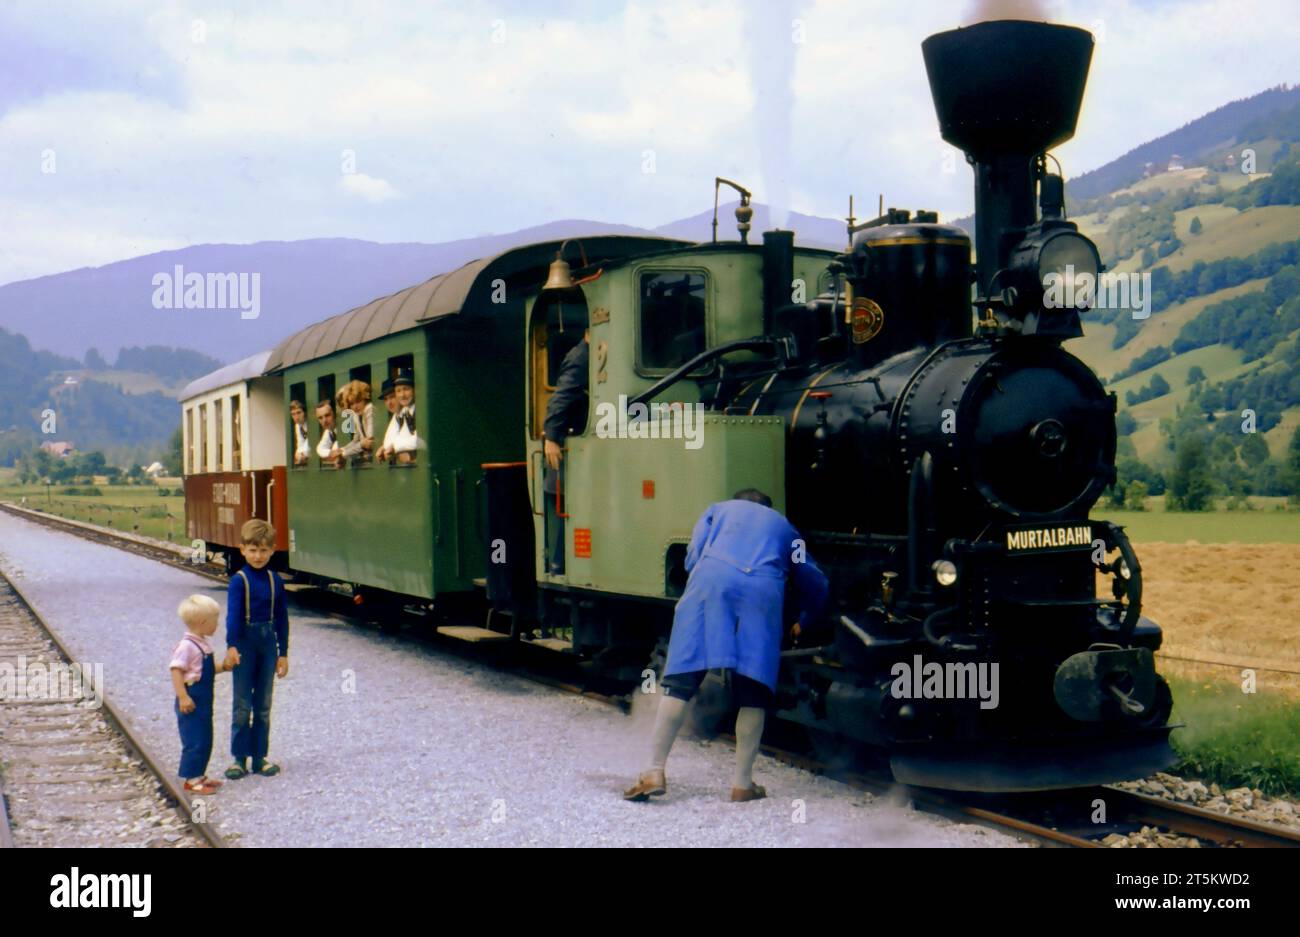 A Murtalbahn train with two wagons in St. Lorenzen, Styria, Austria. People are looking out of the windows. Approx. 1972. Editorial use only. Stock Photo